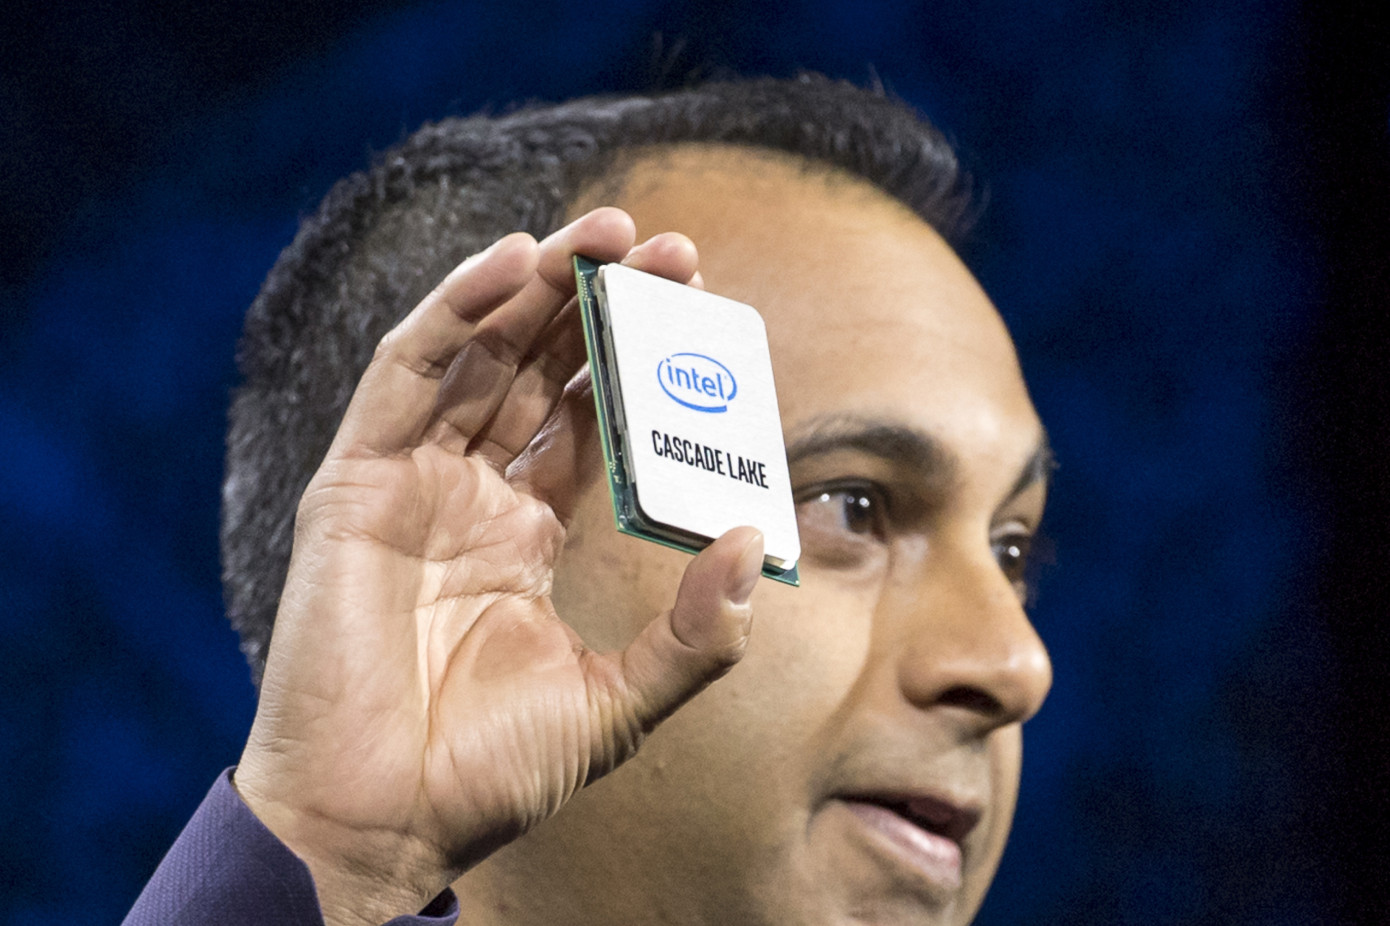 Navin Shenoy, executive vice president and general manager of the Data Center Group at Intel Corp., holds up the Cascade Lake processor during the company's event at the 2019 Consumer Electronics Show (CES) in Las Vegas, Nevada, U.S., on Monday, Jan. 7, 2019. Dozens of companies will give presentations at the event, where attendance is expected to top 180,000, with the trade war between the U.S. and China as well as Apple's sales woes looming over the gathering.  Photographer: David Paul Morris/Bloomberg